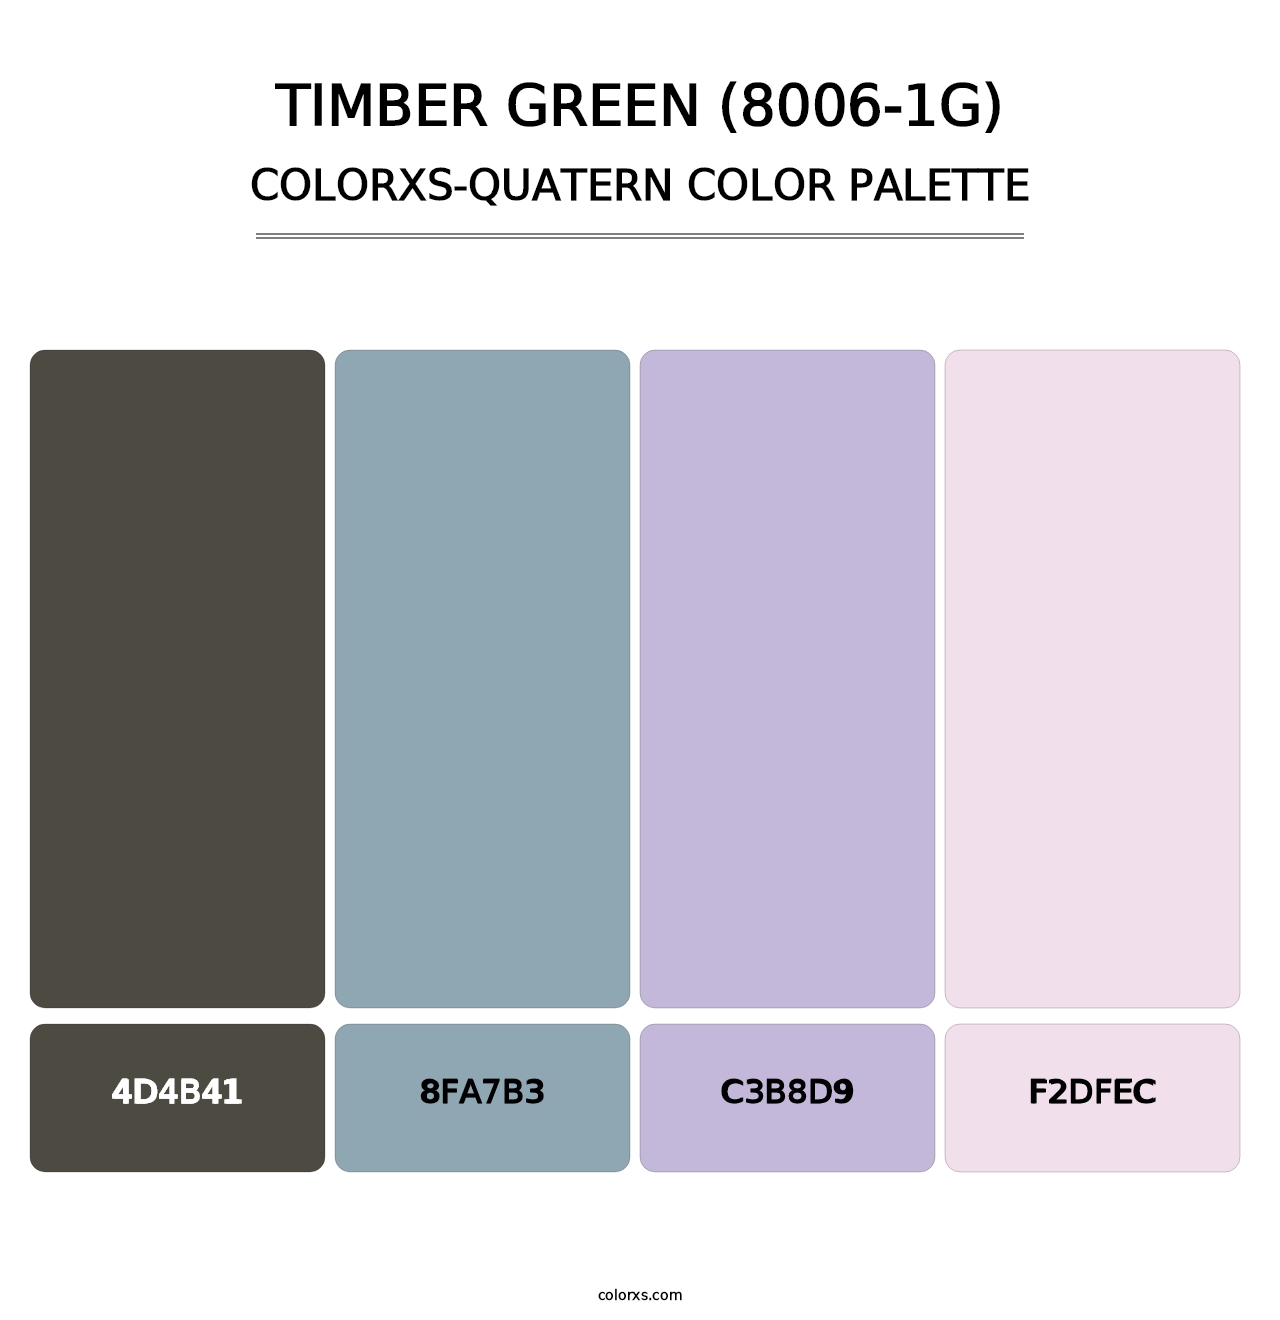 Timber Green (8006-1G) - Colorxs Quatern Palette